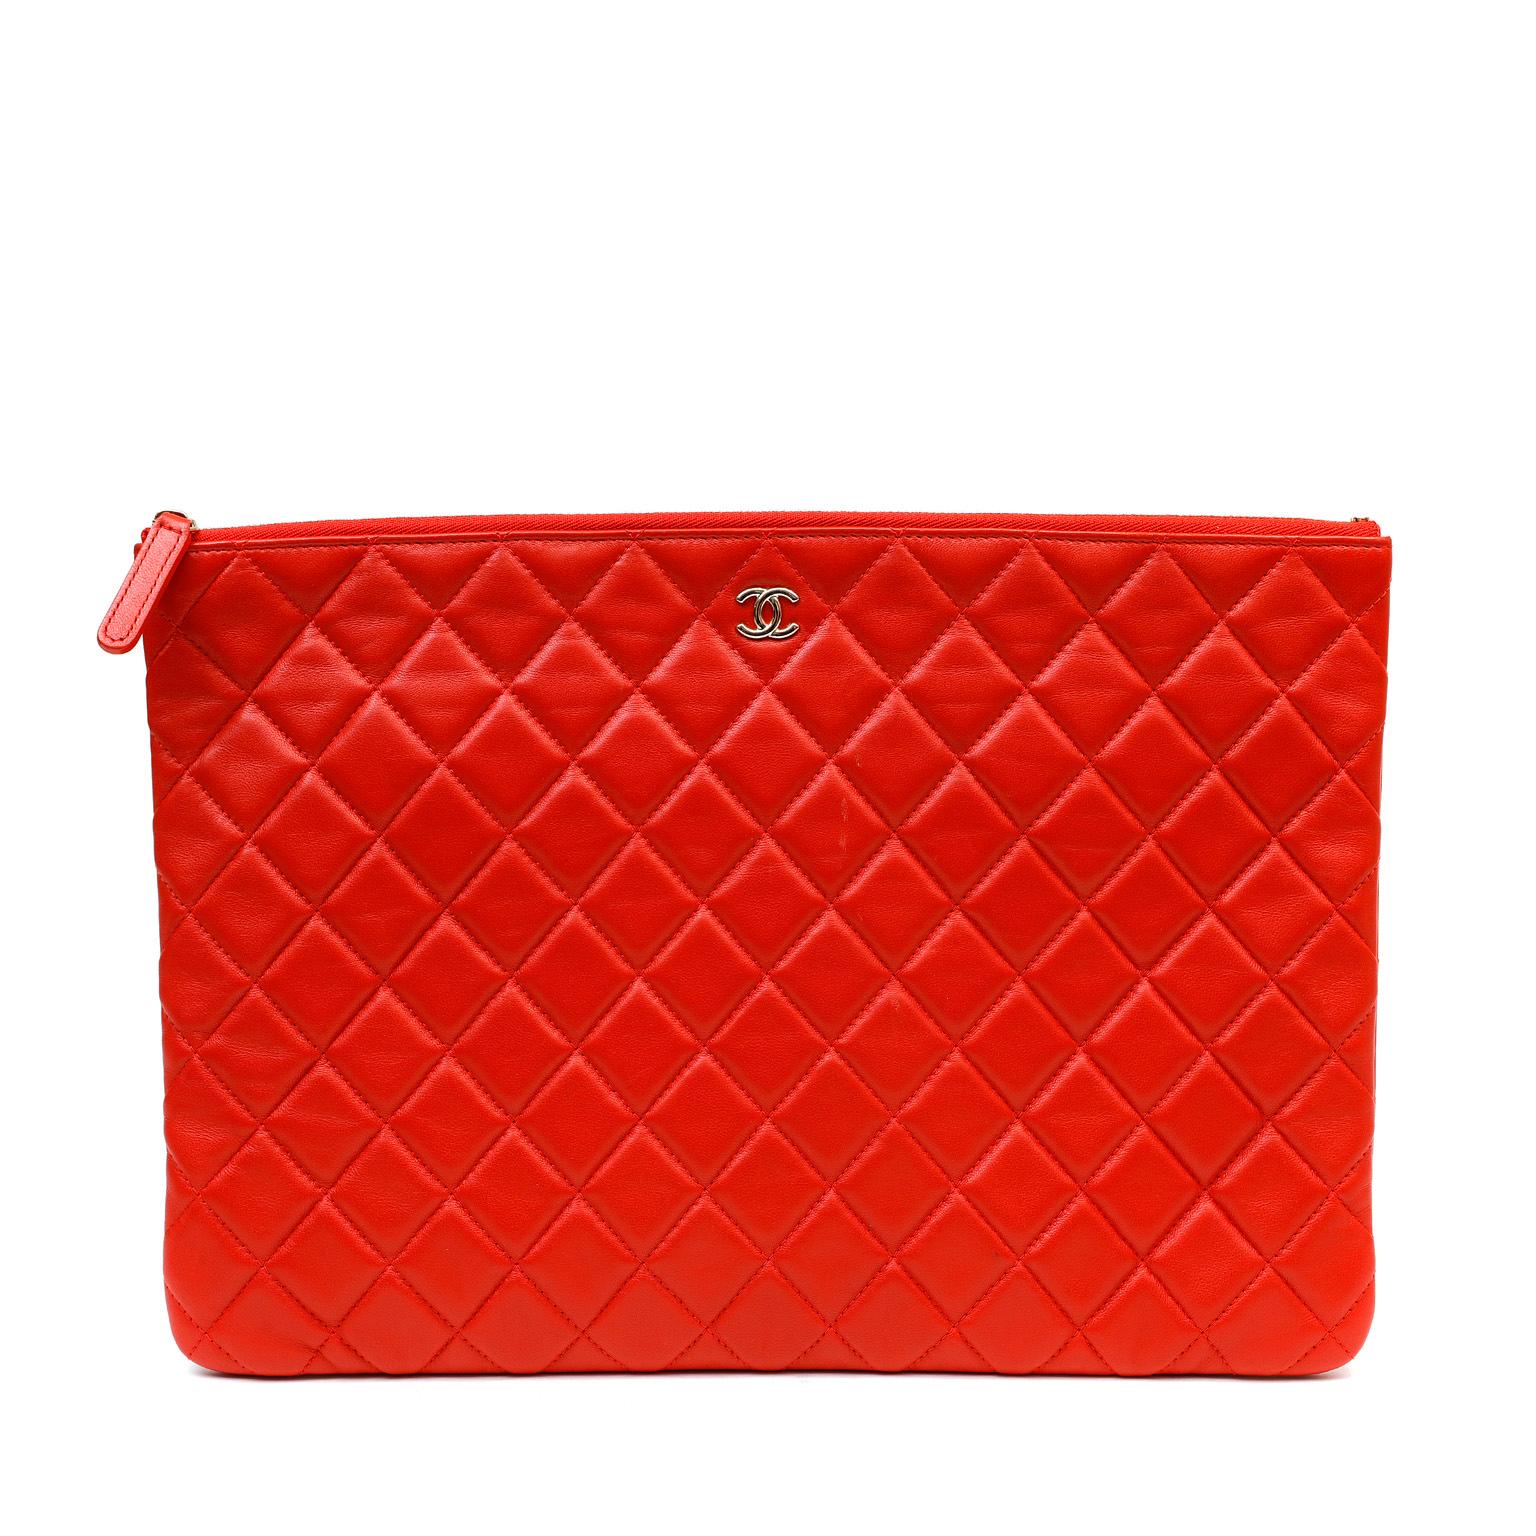  Chanel Red Lambskin Large Classic O Case For Sale 1